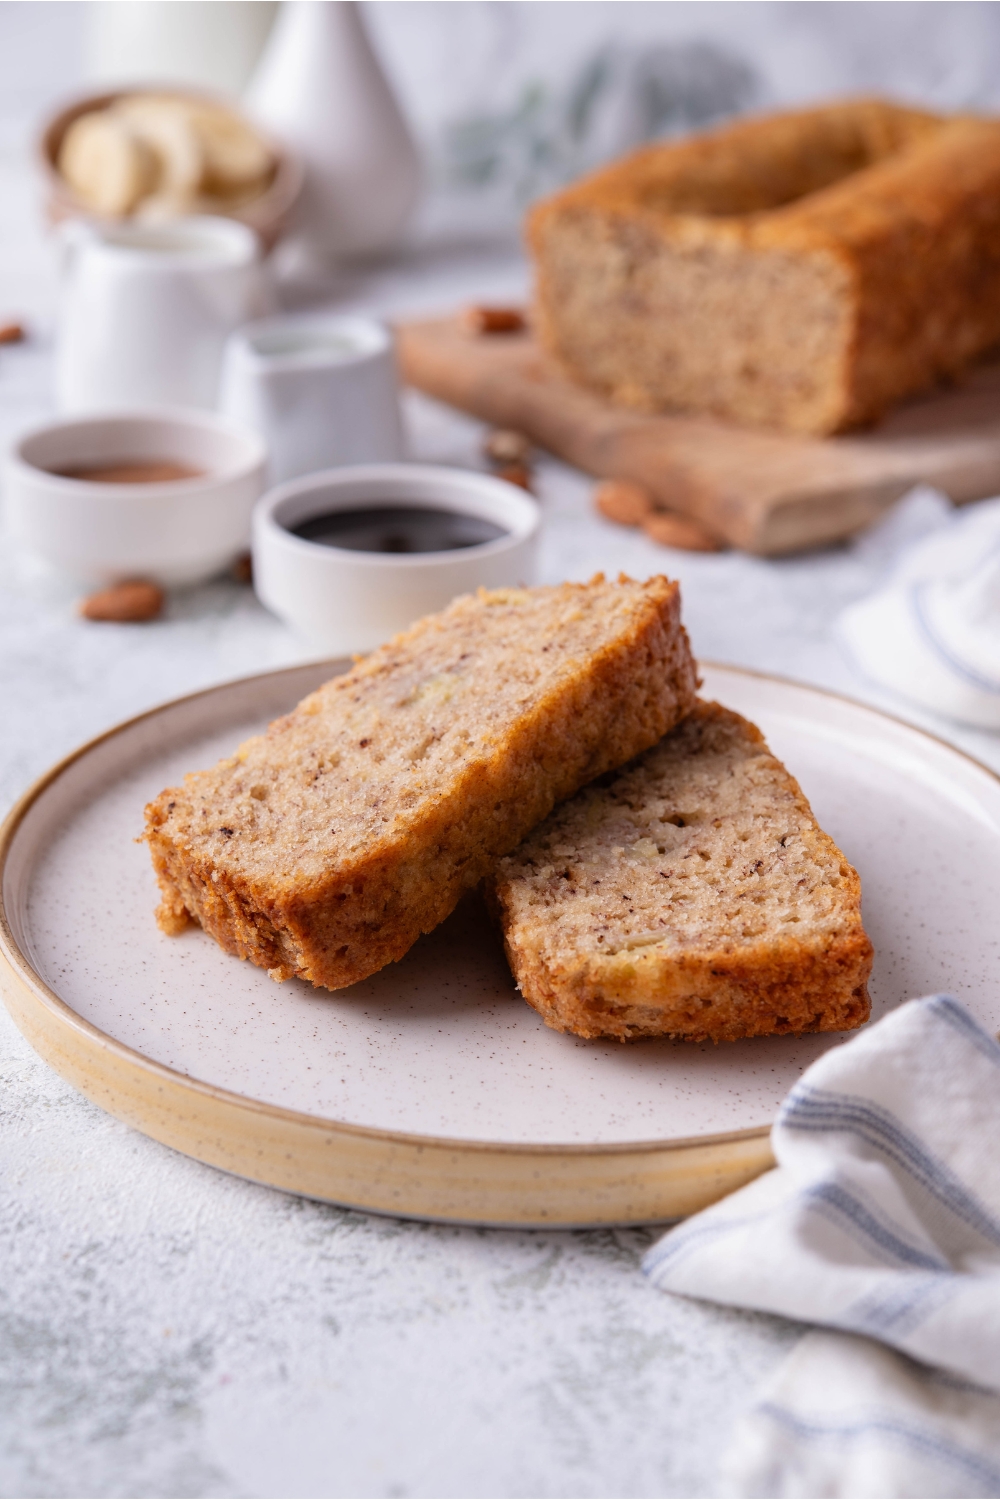 Two slices of banana bread overlapping on a plate with the loaf of banana bread in the background next to bowls of jam.